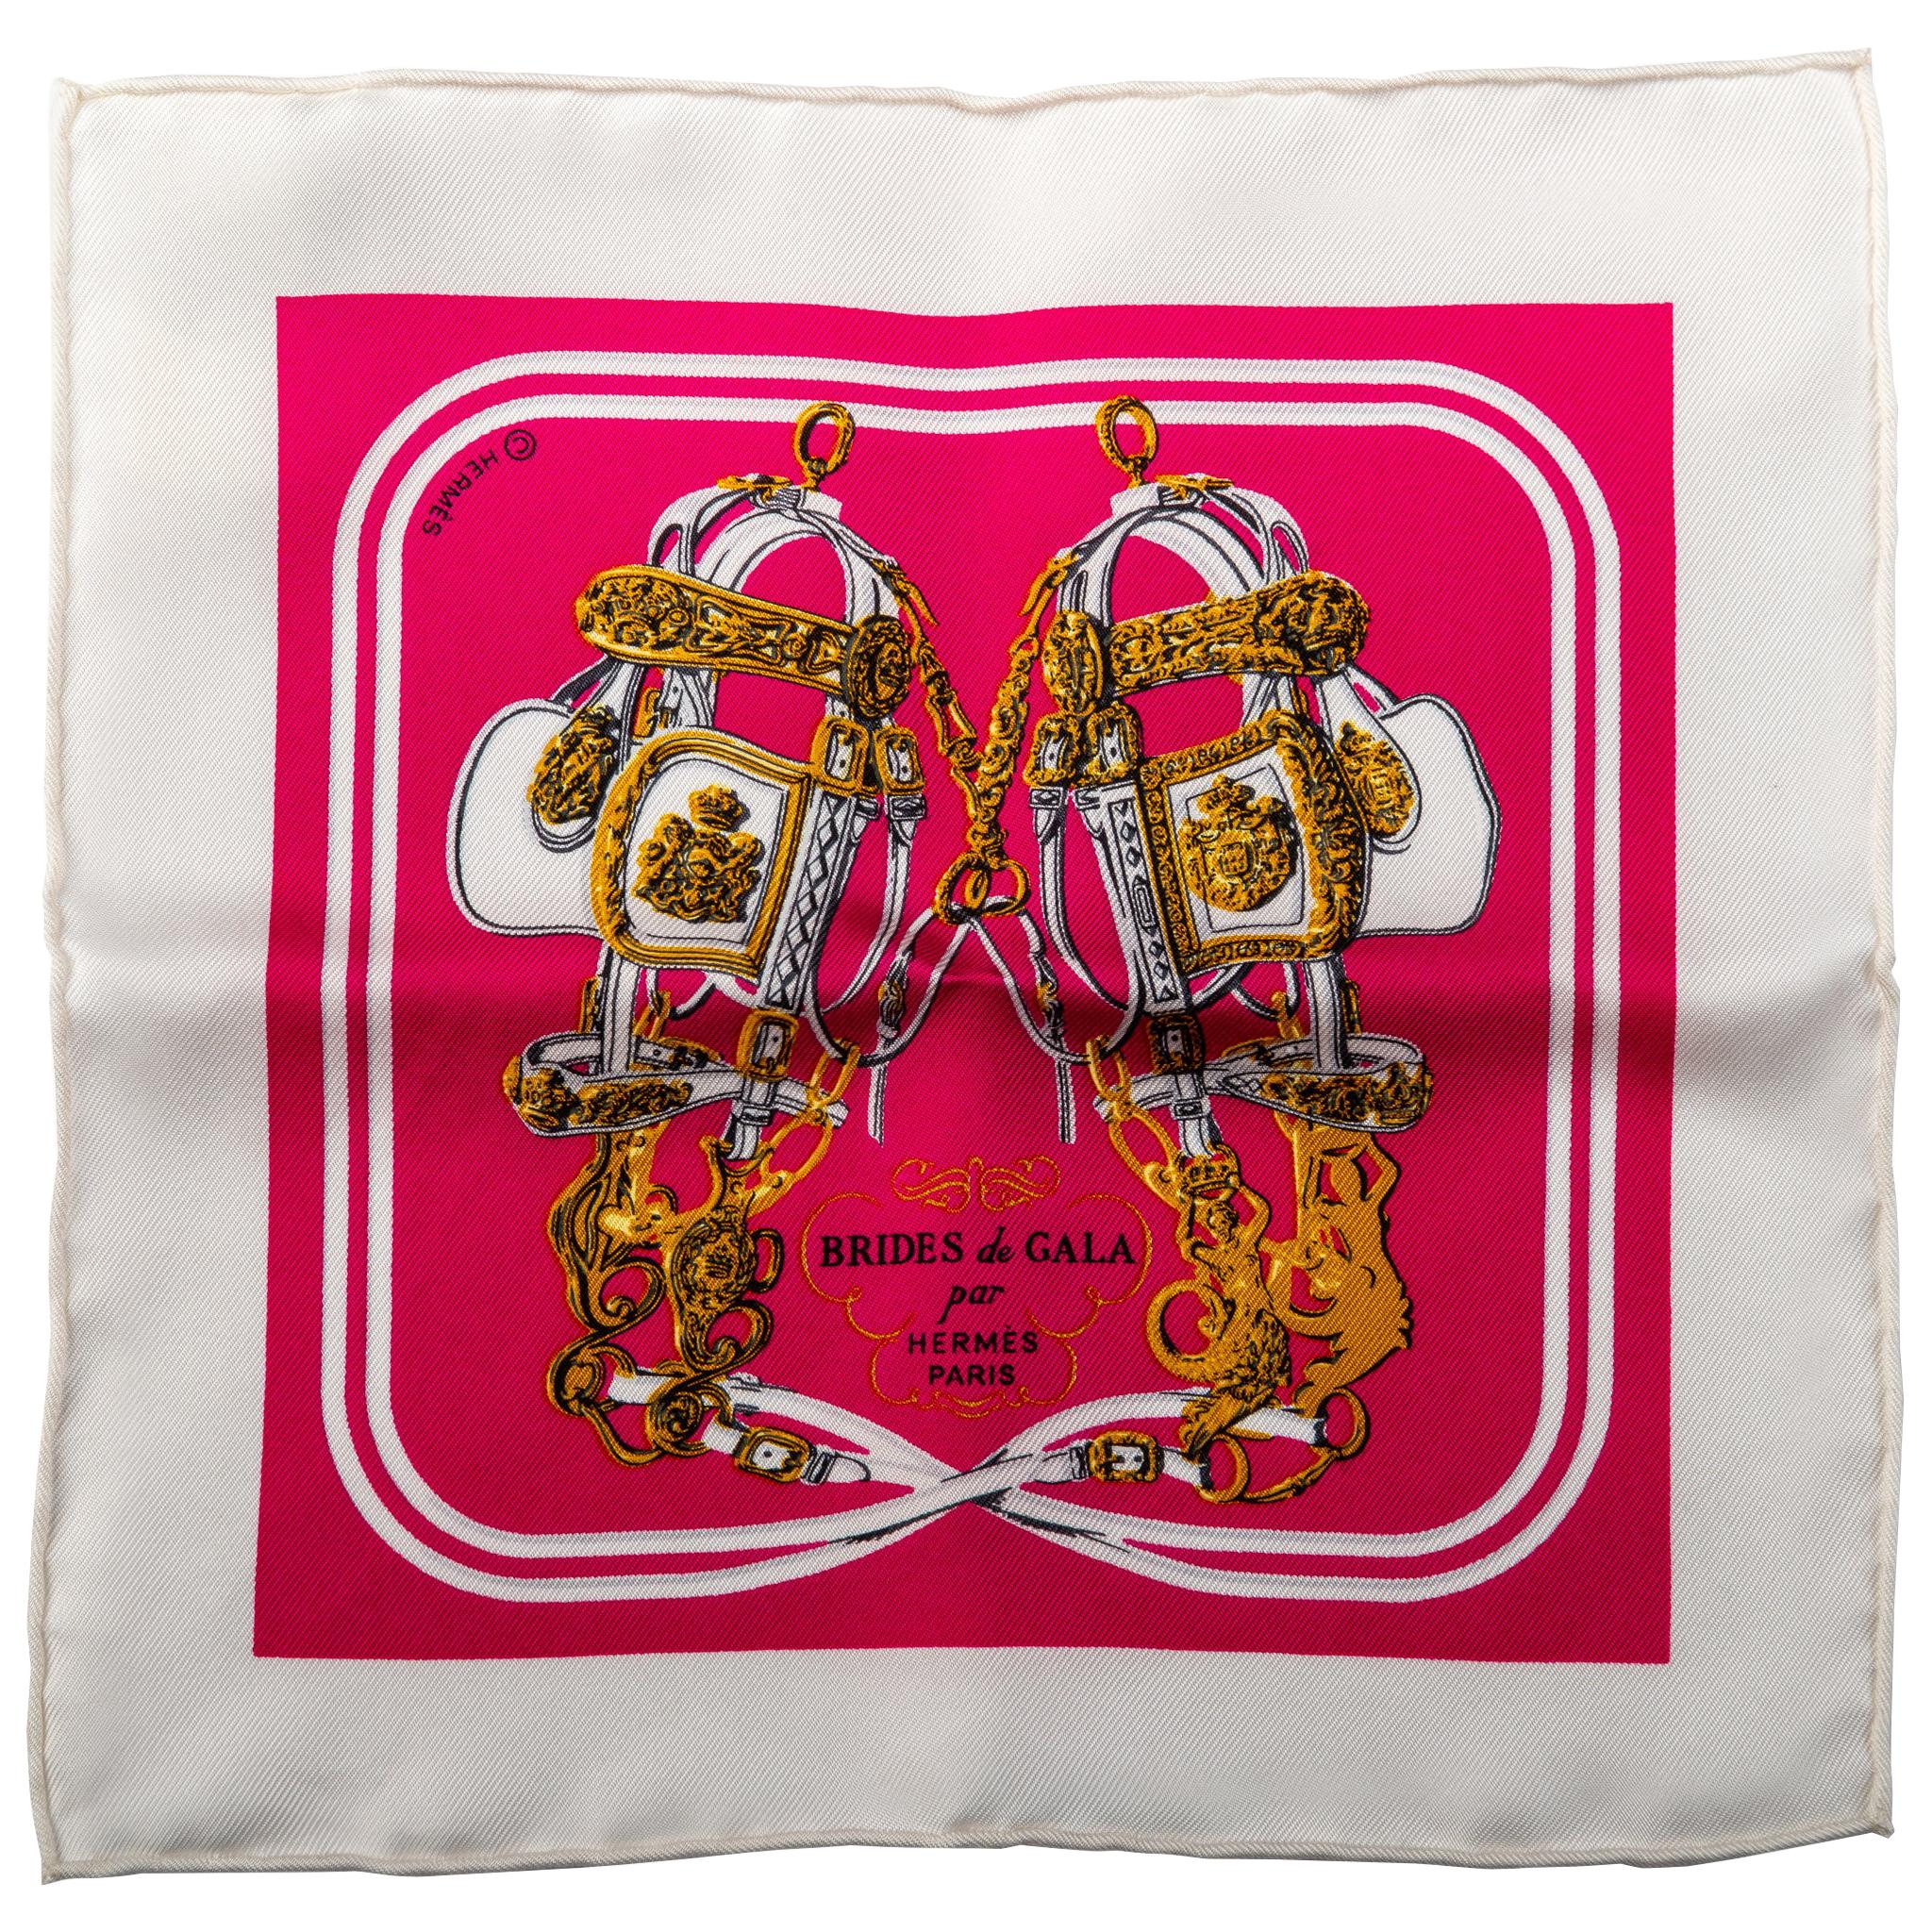 New Hermes Brides De Gala Mini Silk 8" Scarf with Box For Sale